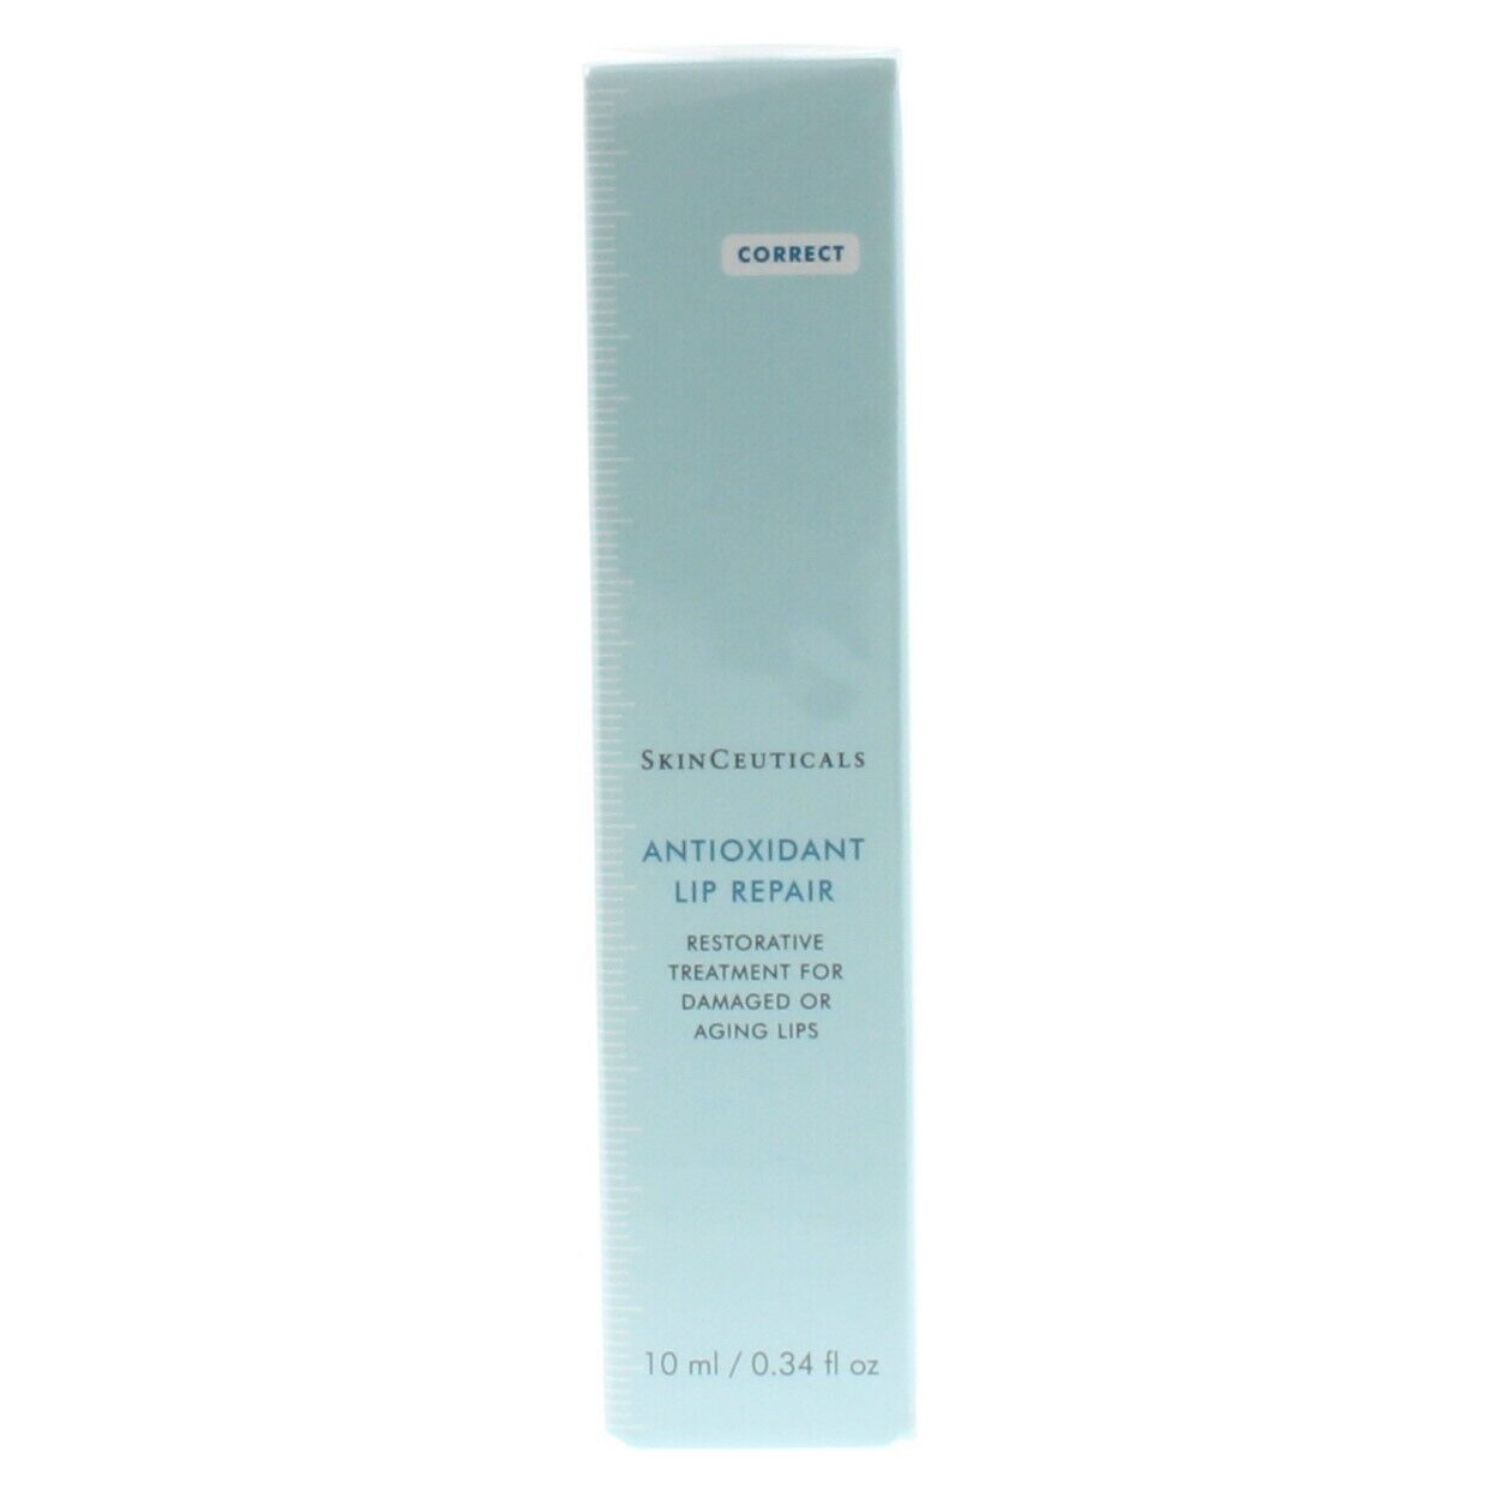 SkinCeuticals Antioxidant Lip Repair for Damaged or Aging Lips 0.34 oz - image 3 of 5